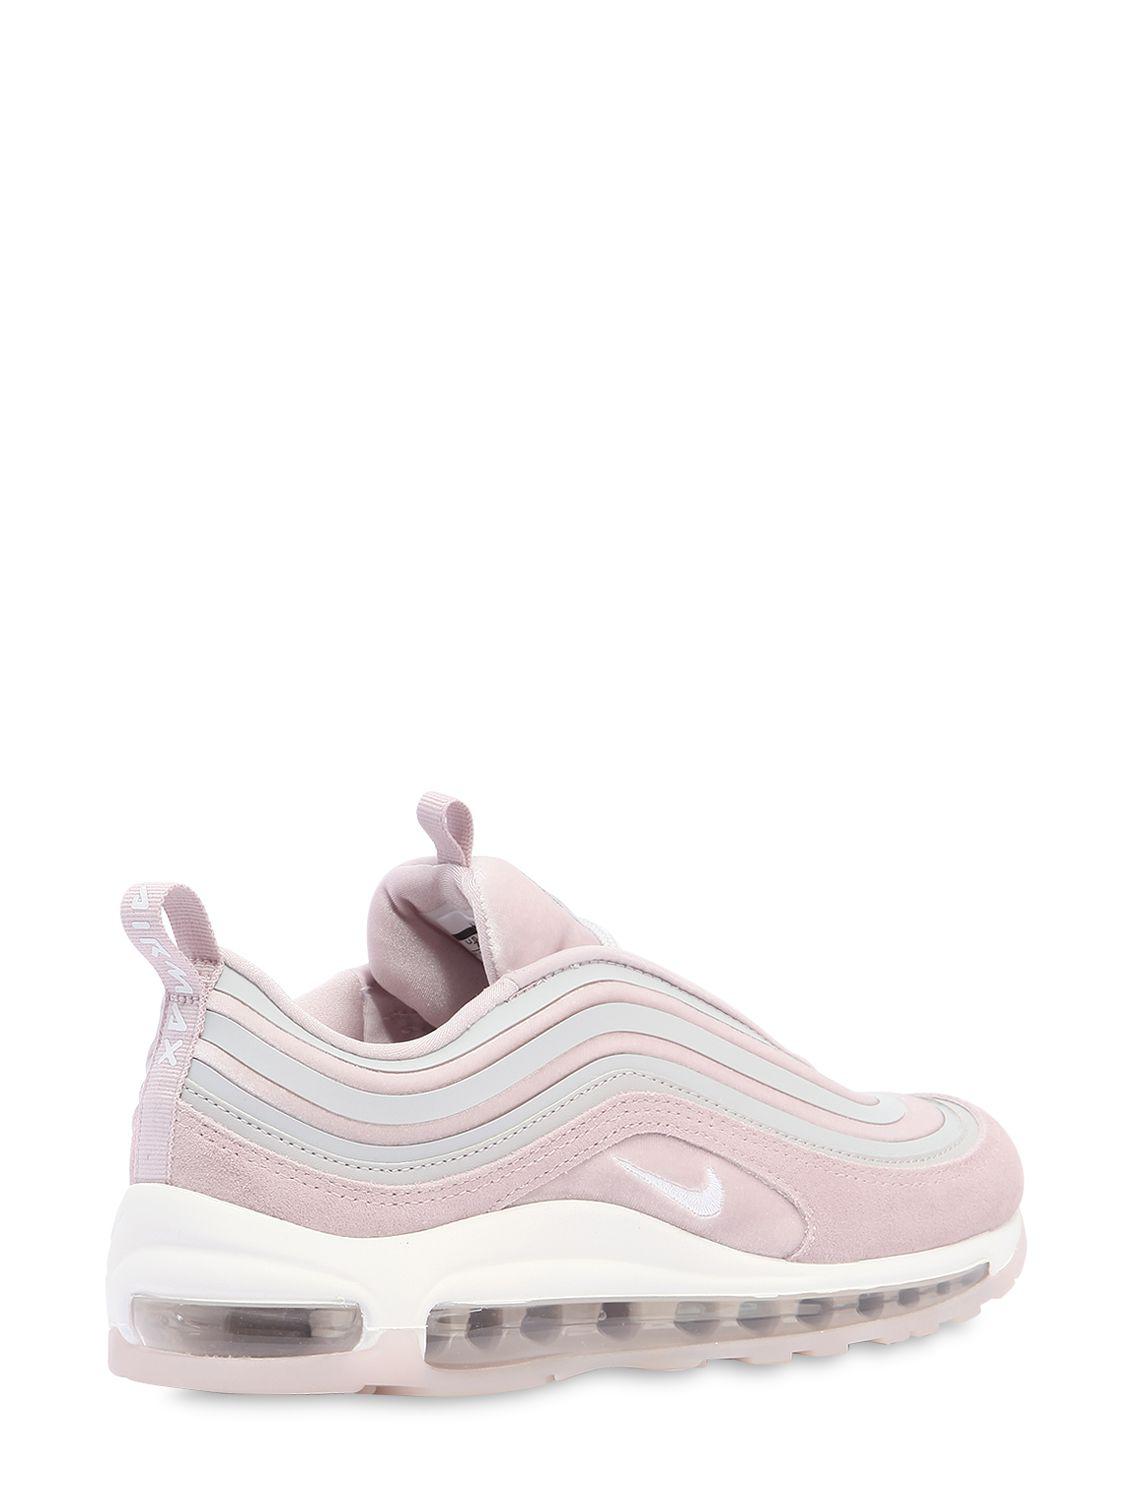 Nike Suede Air Max 97 Ultra Lux Sneakers in Light Pink (Pink) - Lyst